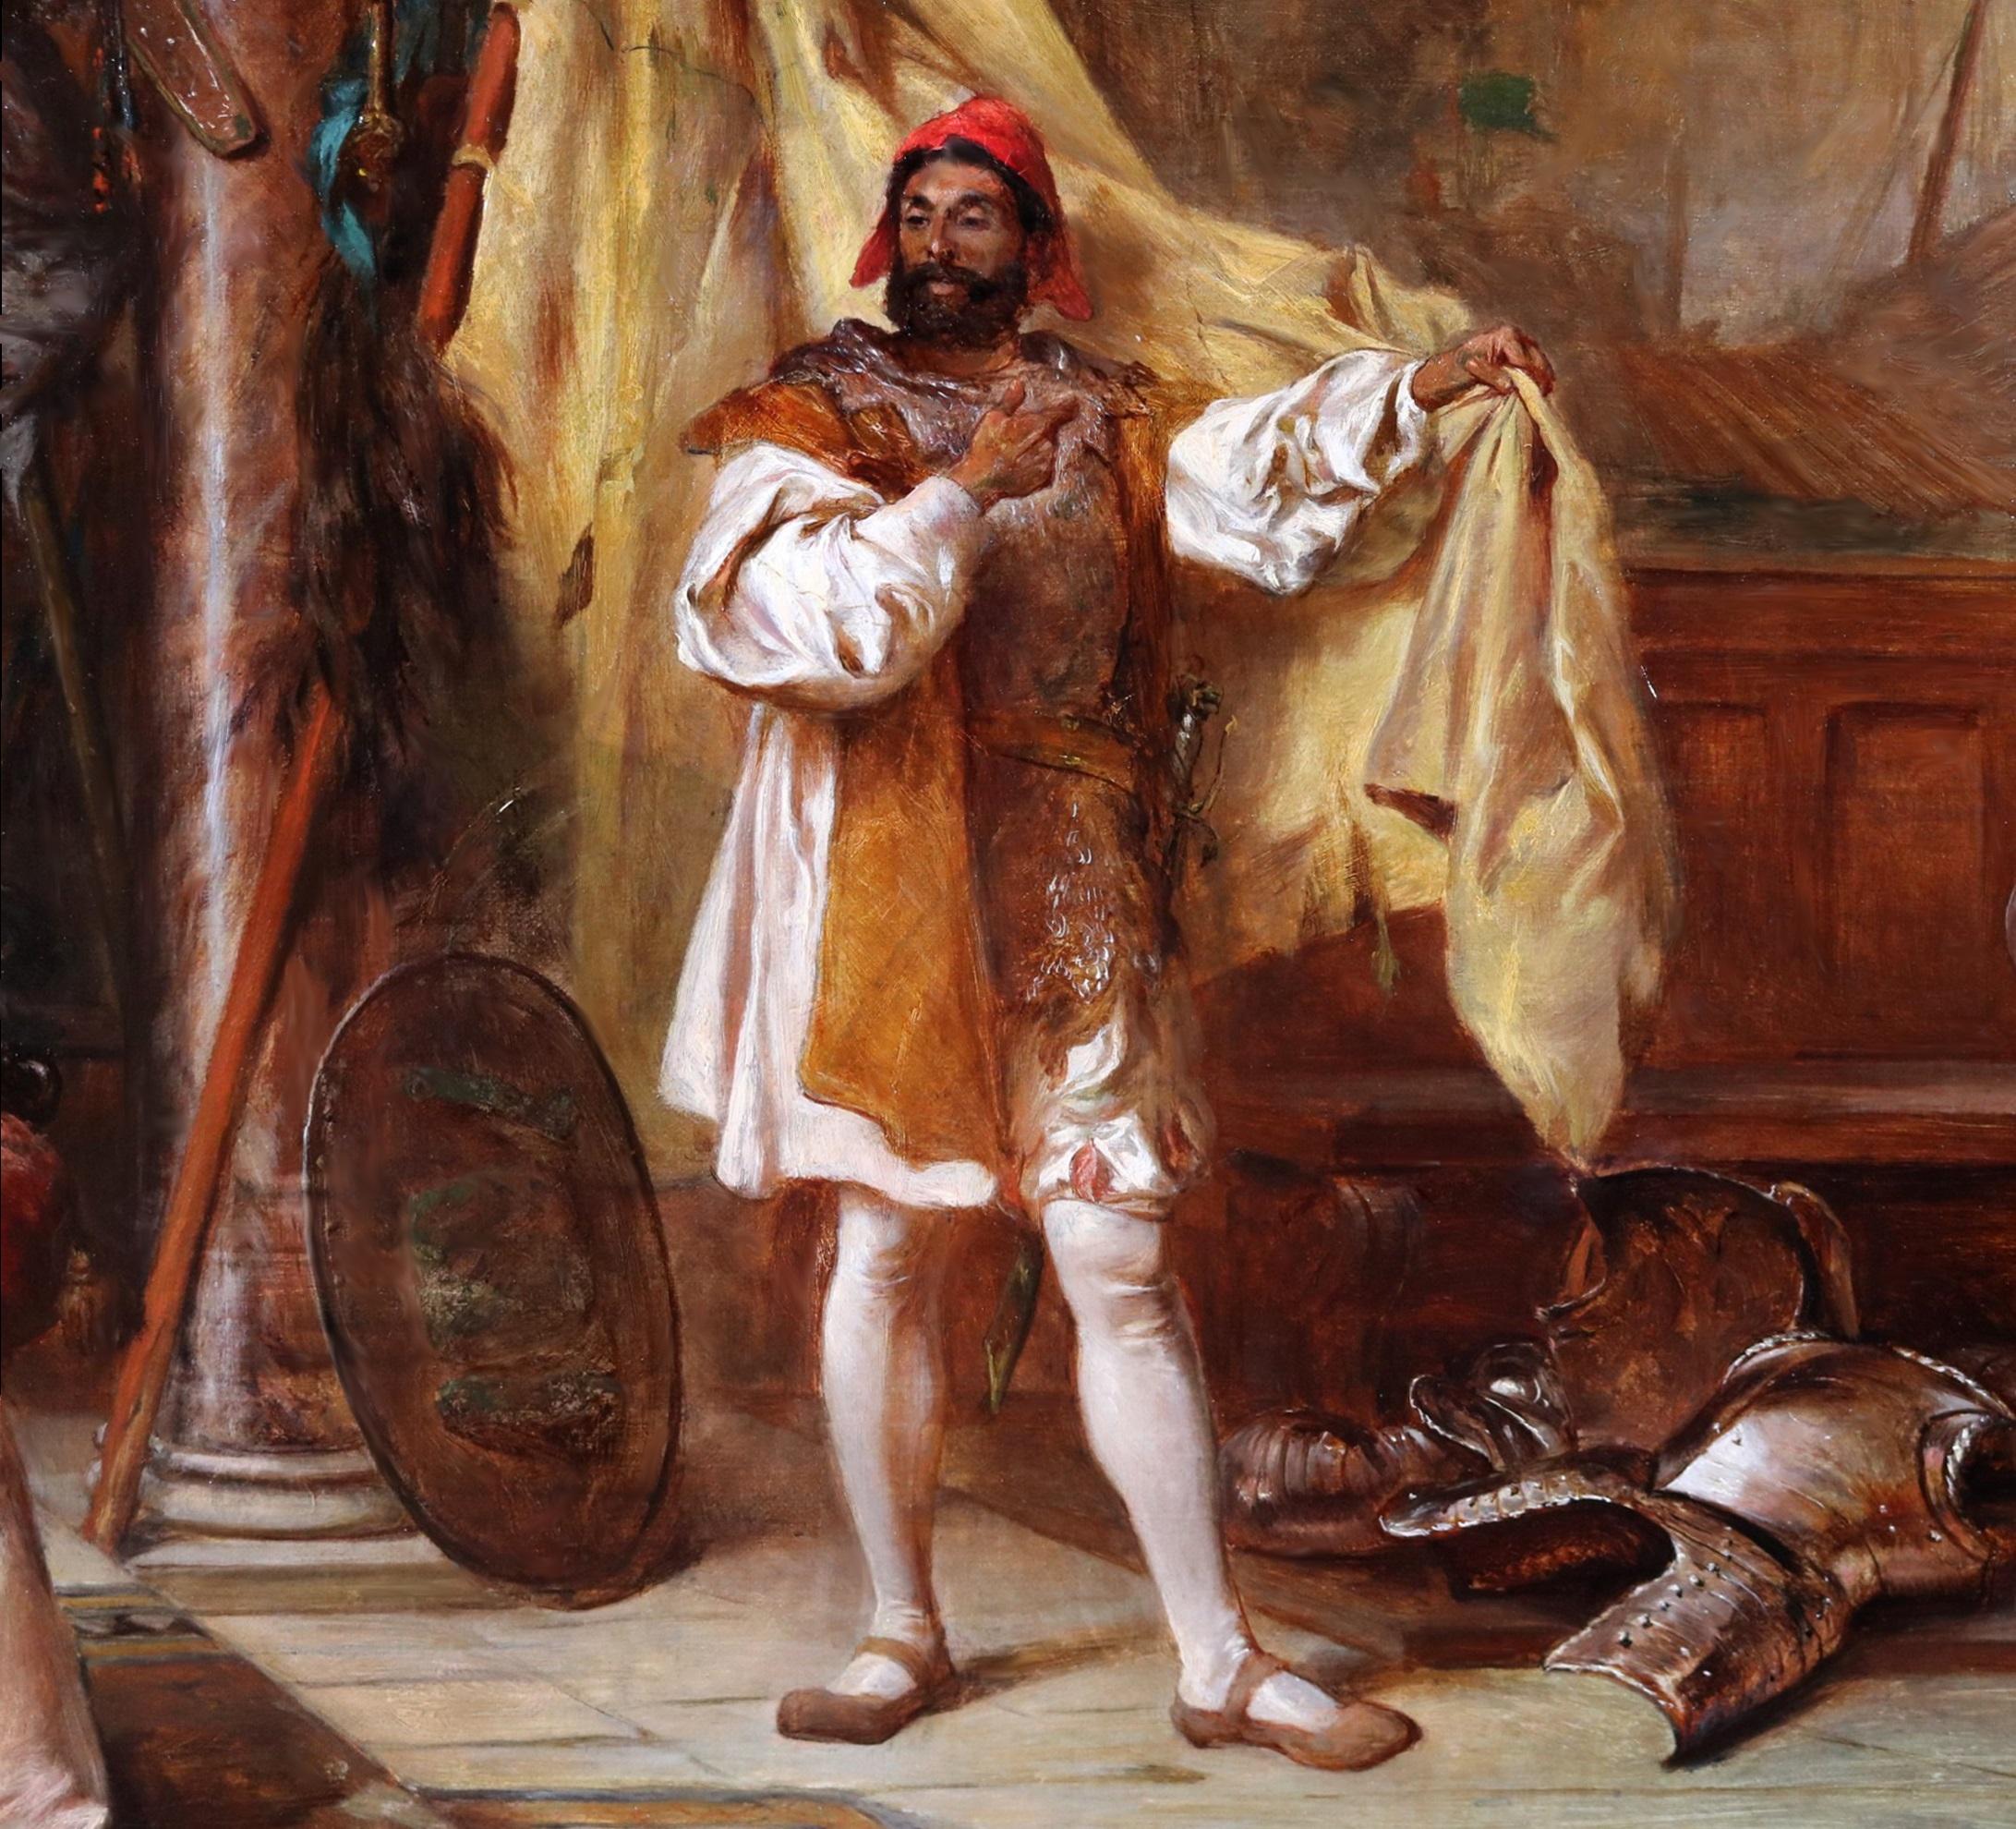 ‘Othello recounting his adventures to Desdemona and Brabantio’ by Robert Alexander Hillingford (1828-1904). 

The painting – which depicts Shakespeare’s Venetian general, his lover Desdemona, and her senator father – is signed by the artist and